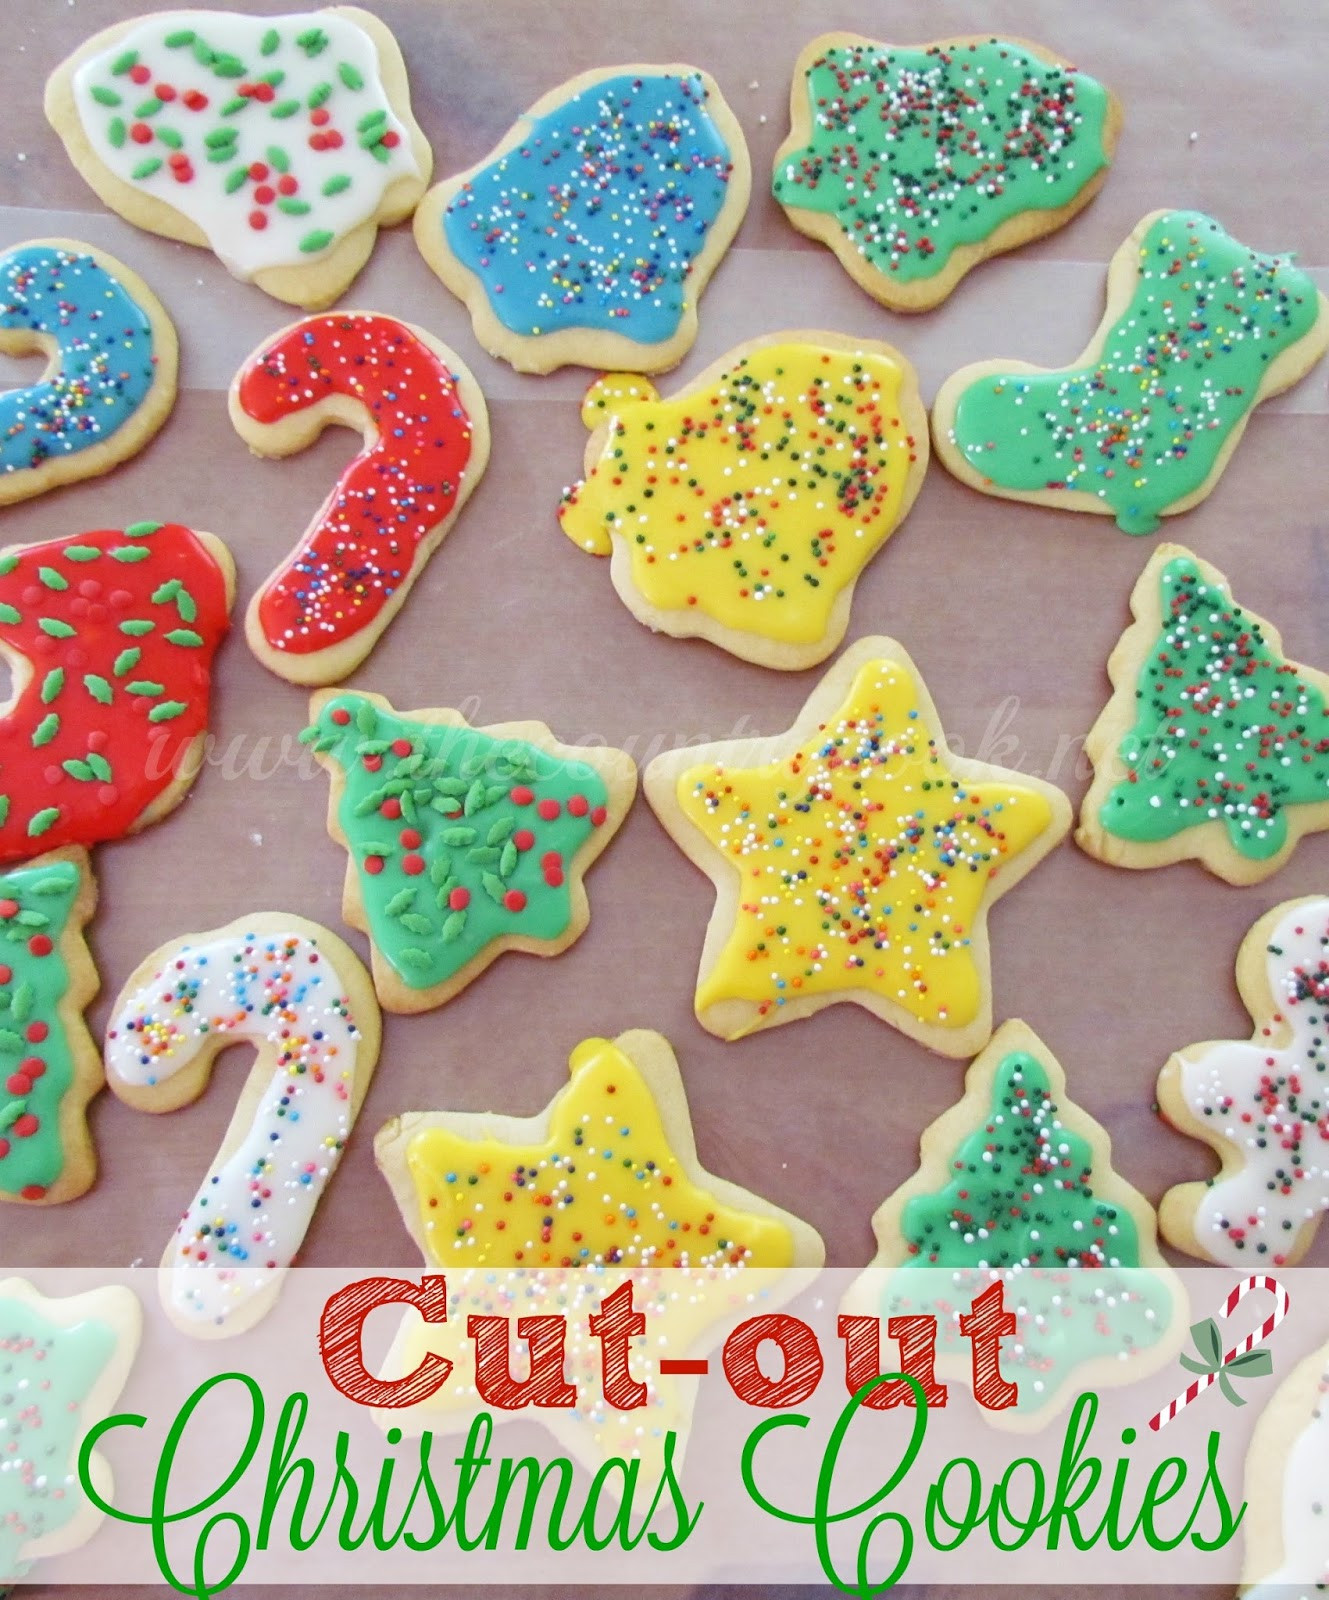 Cutout Christmas Cookies
 Cut Out Sugar Cookies The Country Cook